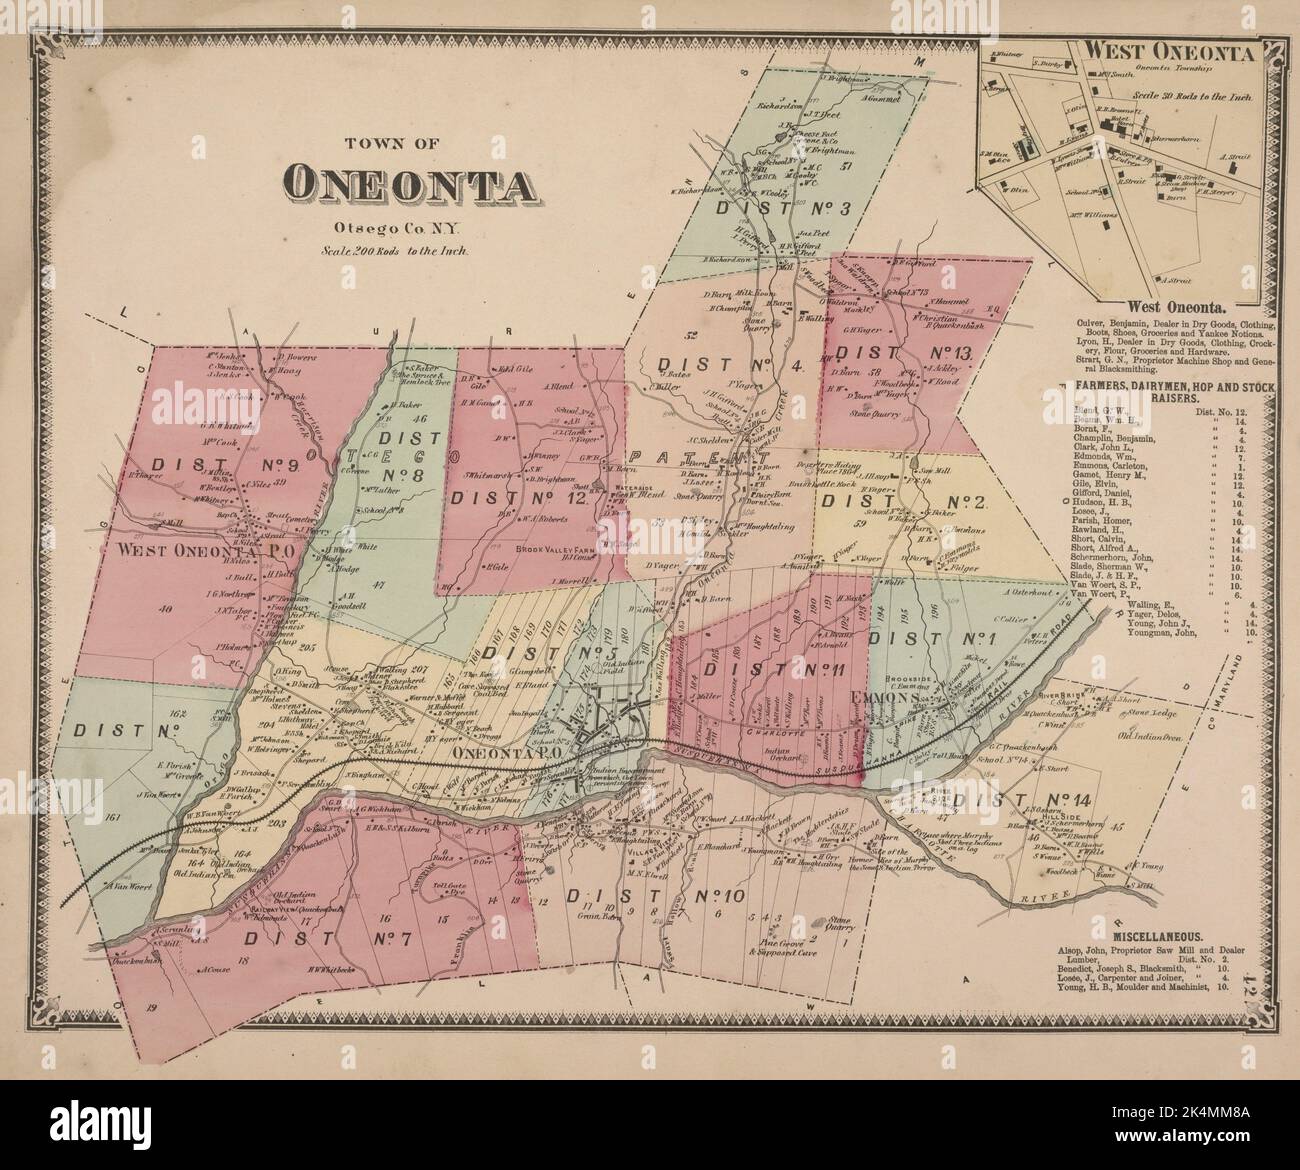 West Oneonta [Dorf]; West Oneonta Business Directory. ; Stadt Oneonta, Otsego Co. N.Y. [Township]. Beers, F. W. (Frederick W.) (Herausgeber). Stockfoto